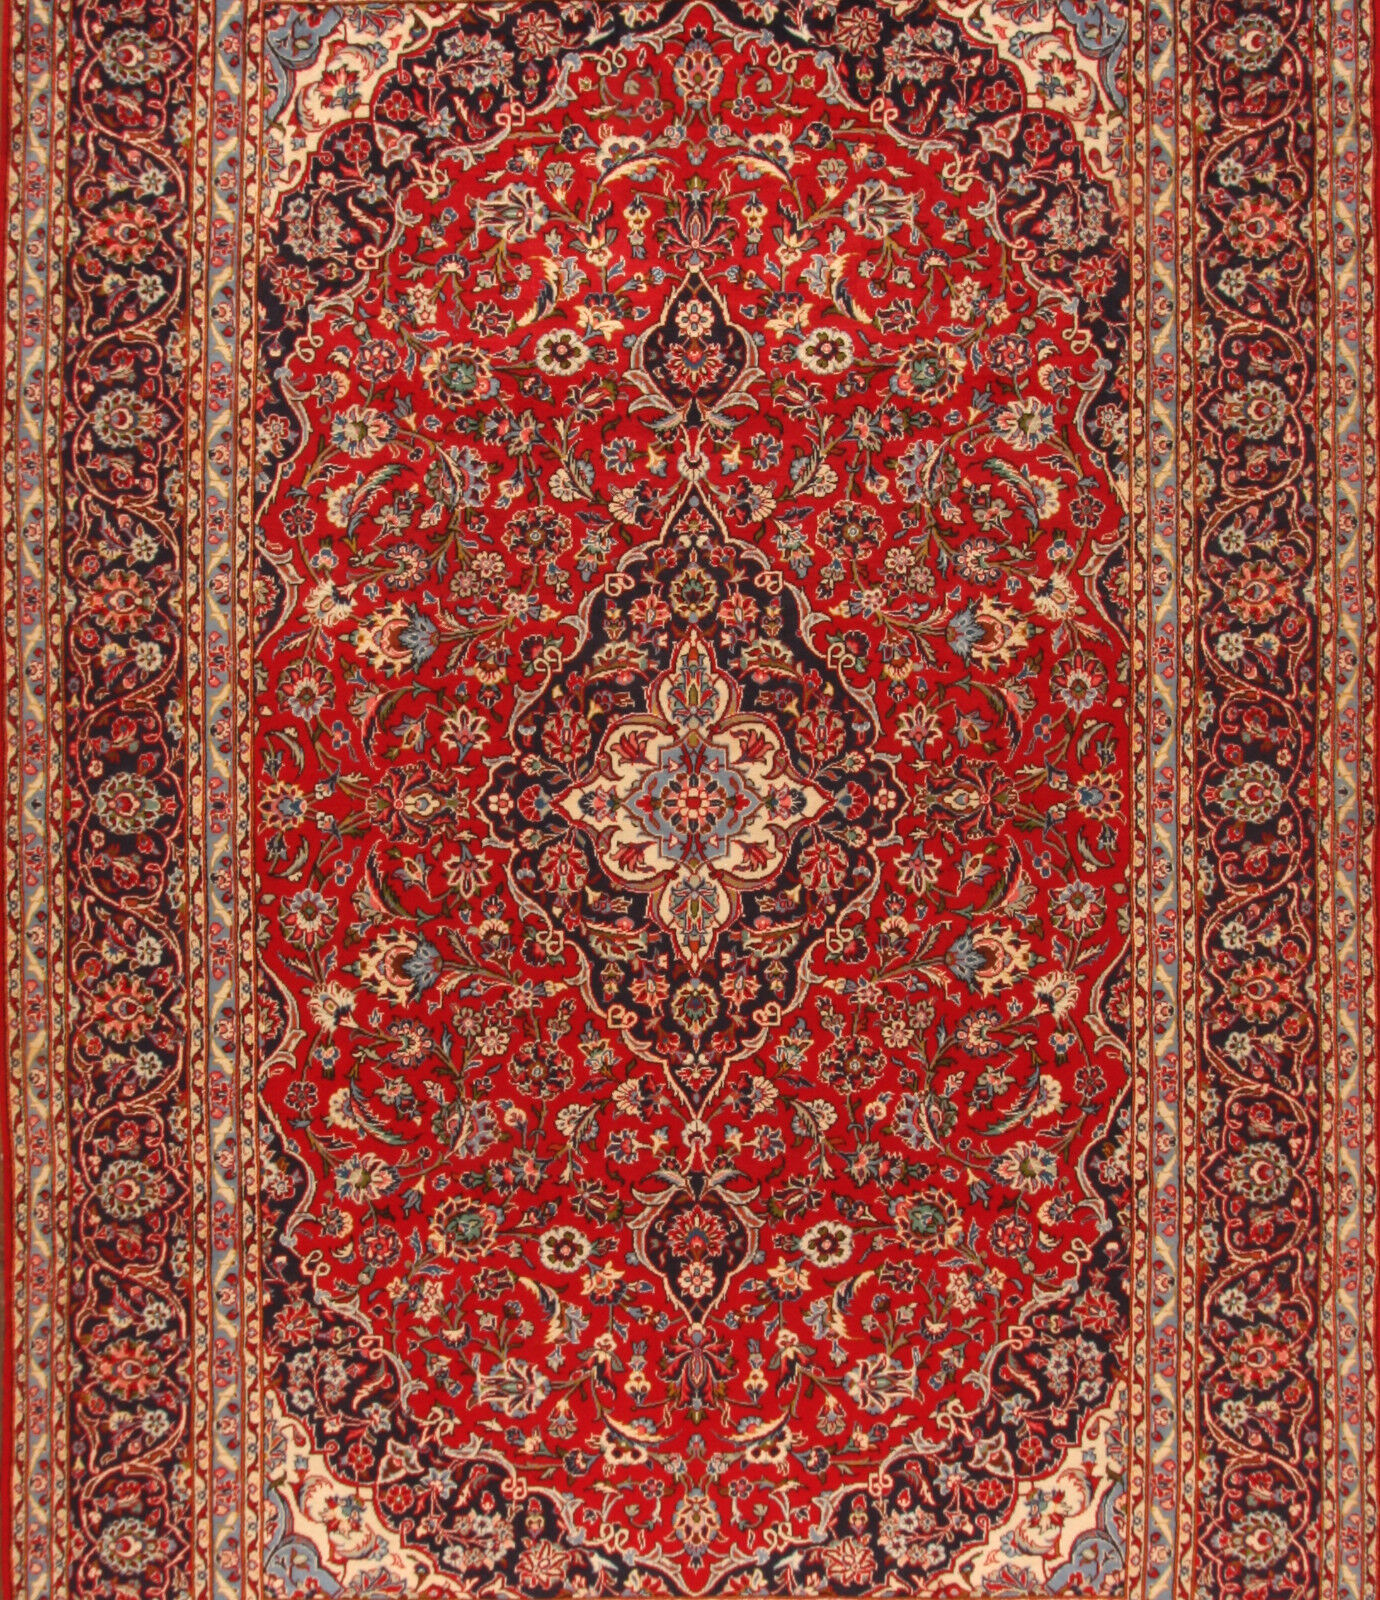 Detailed shot of the wool material used in the Handmade Vintage Persian Style Kashan Rug